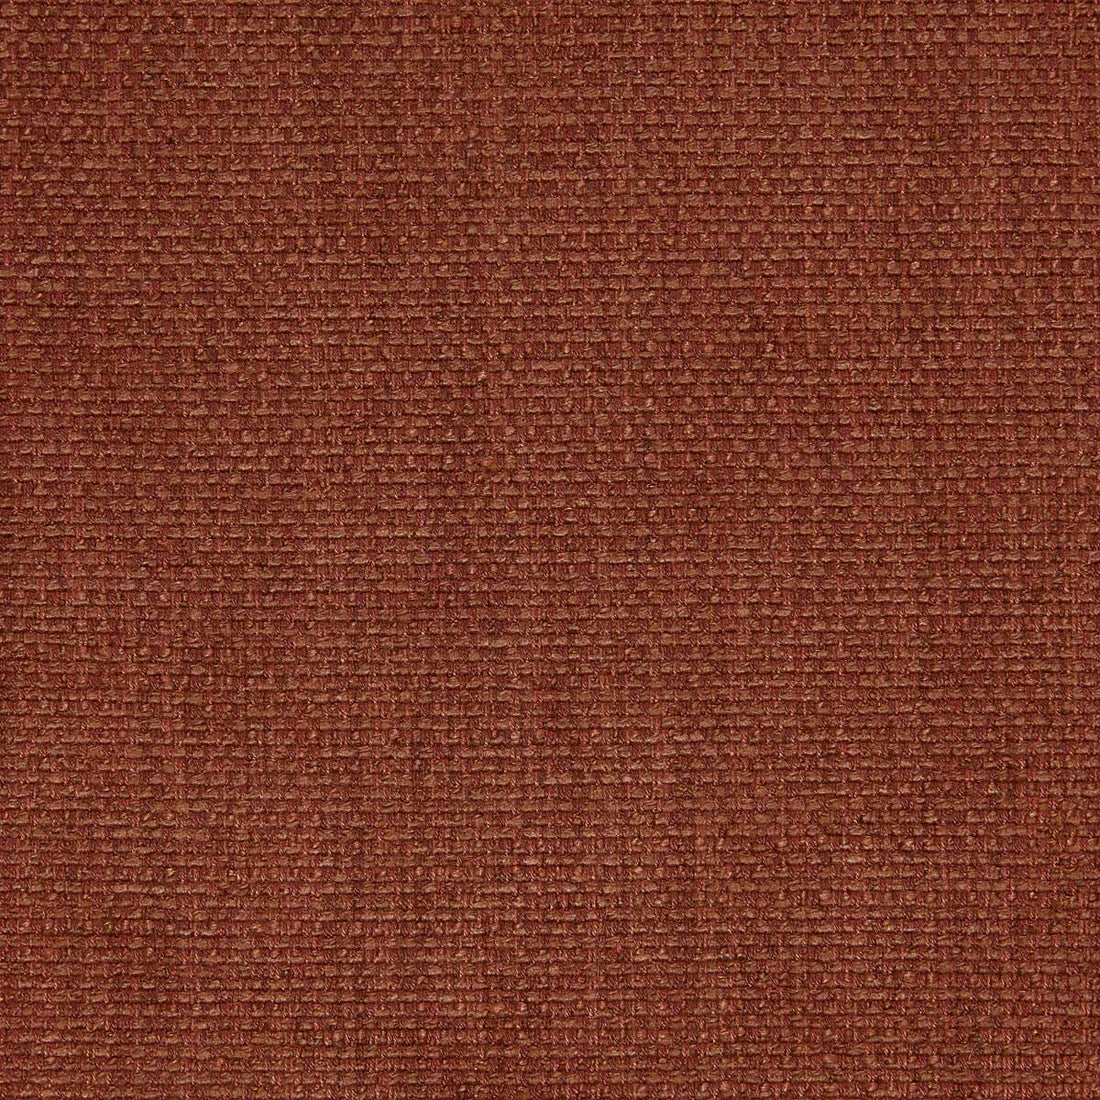 Godai fabric in 8 color - pattern LZ-30349.08.0 - by Kravet Design in the Lizzo collection